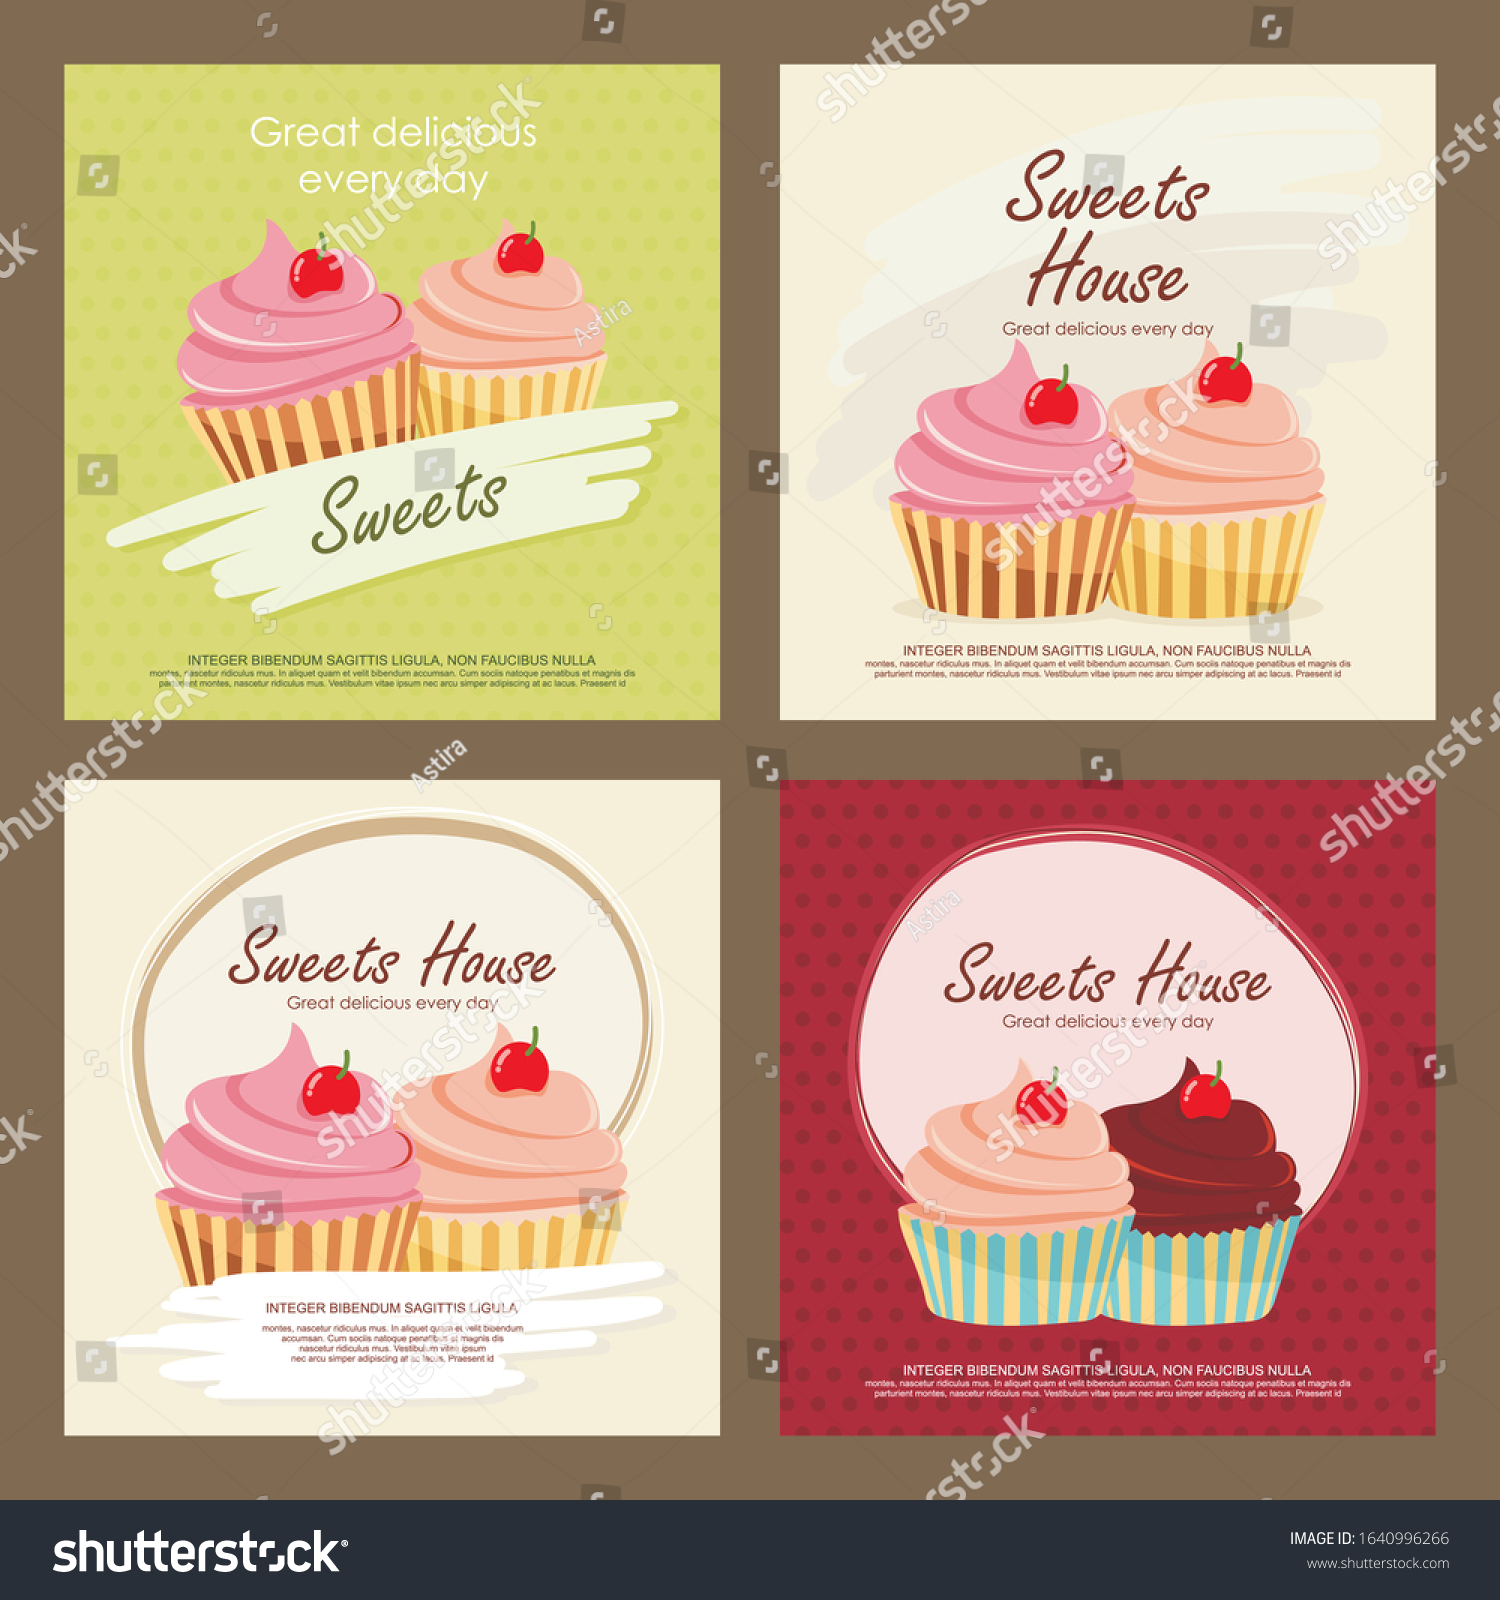 Cupcake Flyer Template Collection Lovely Colorful Stock Vector Intended For Cupcake Flyer Templates Free